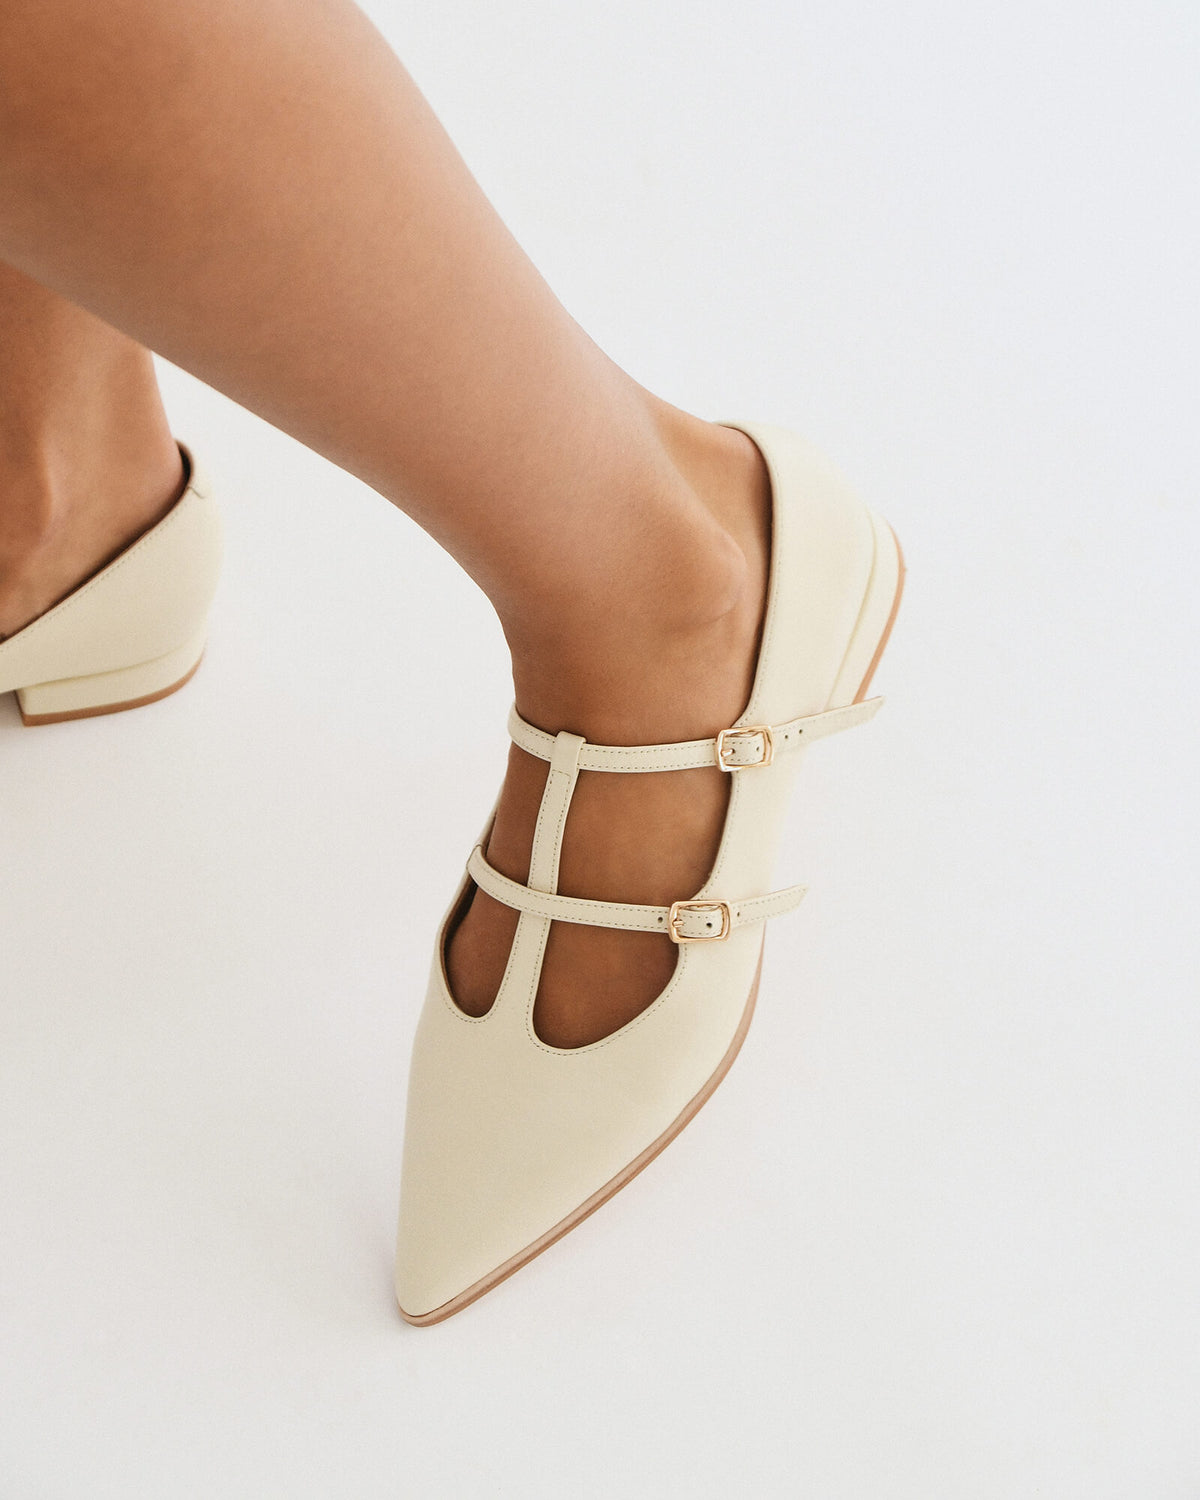 CANDICE DRESS FLATS OFF WHITE LEATHER